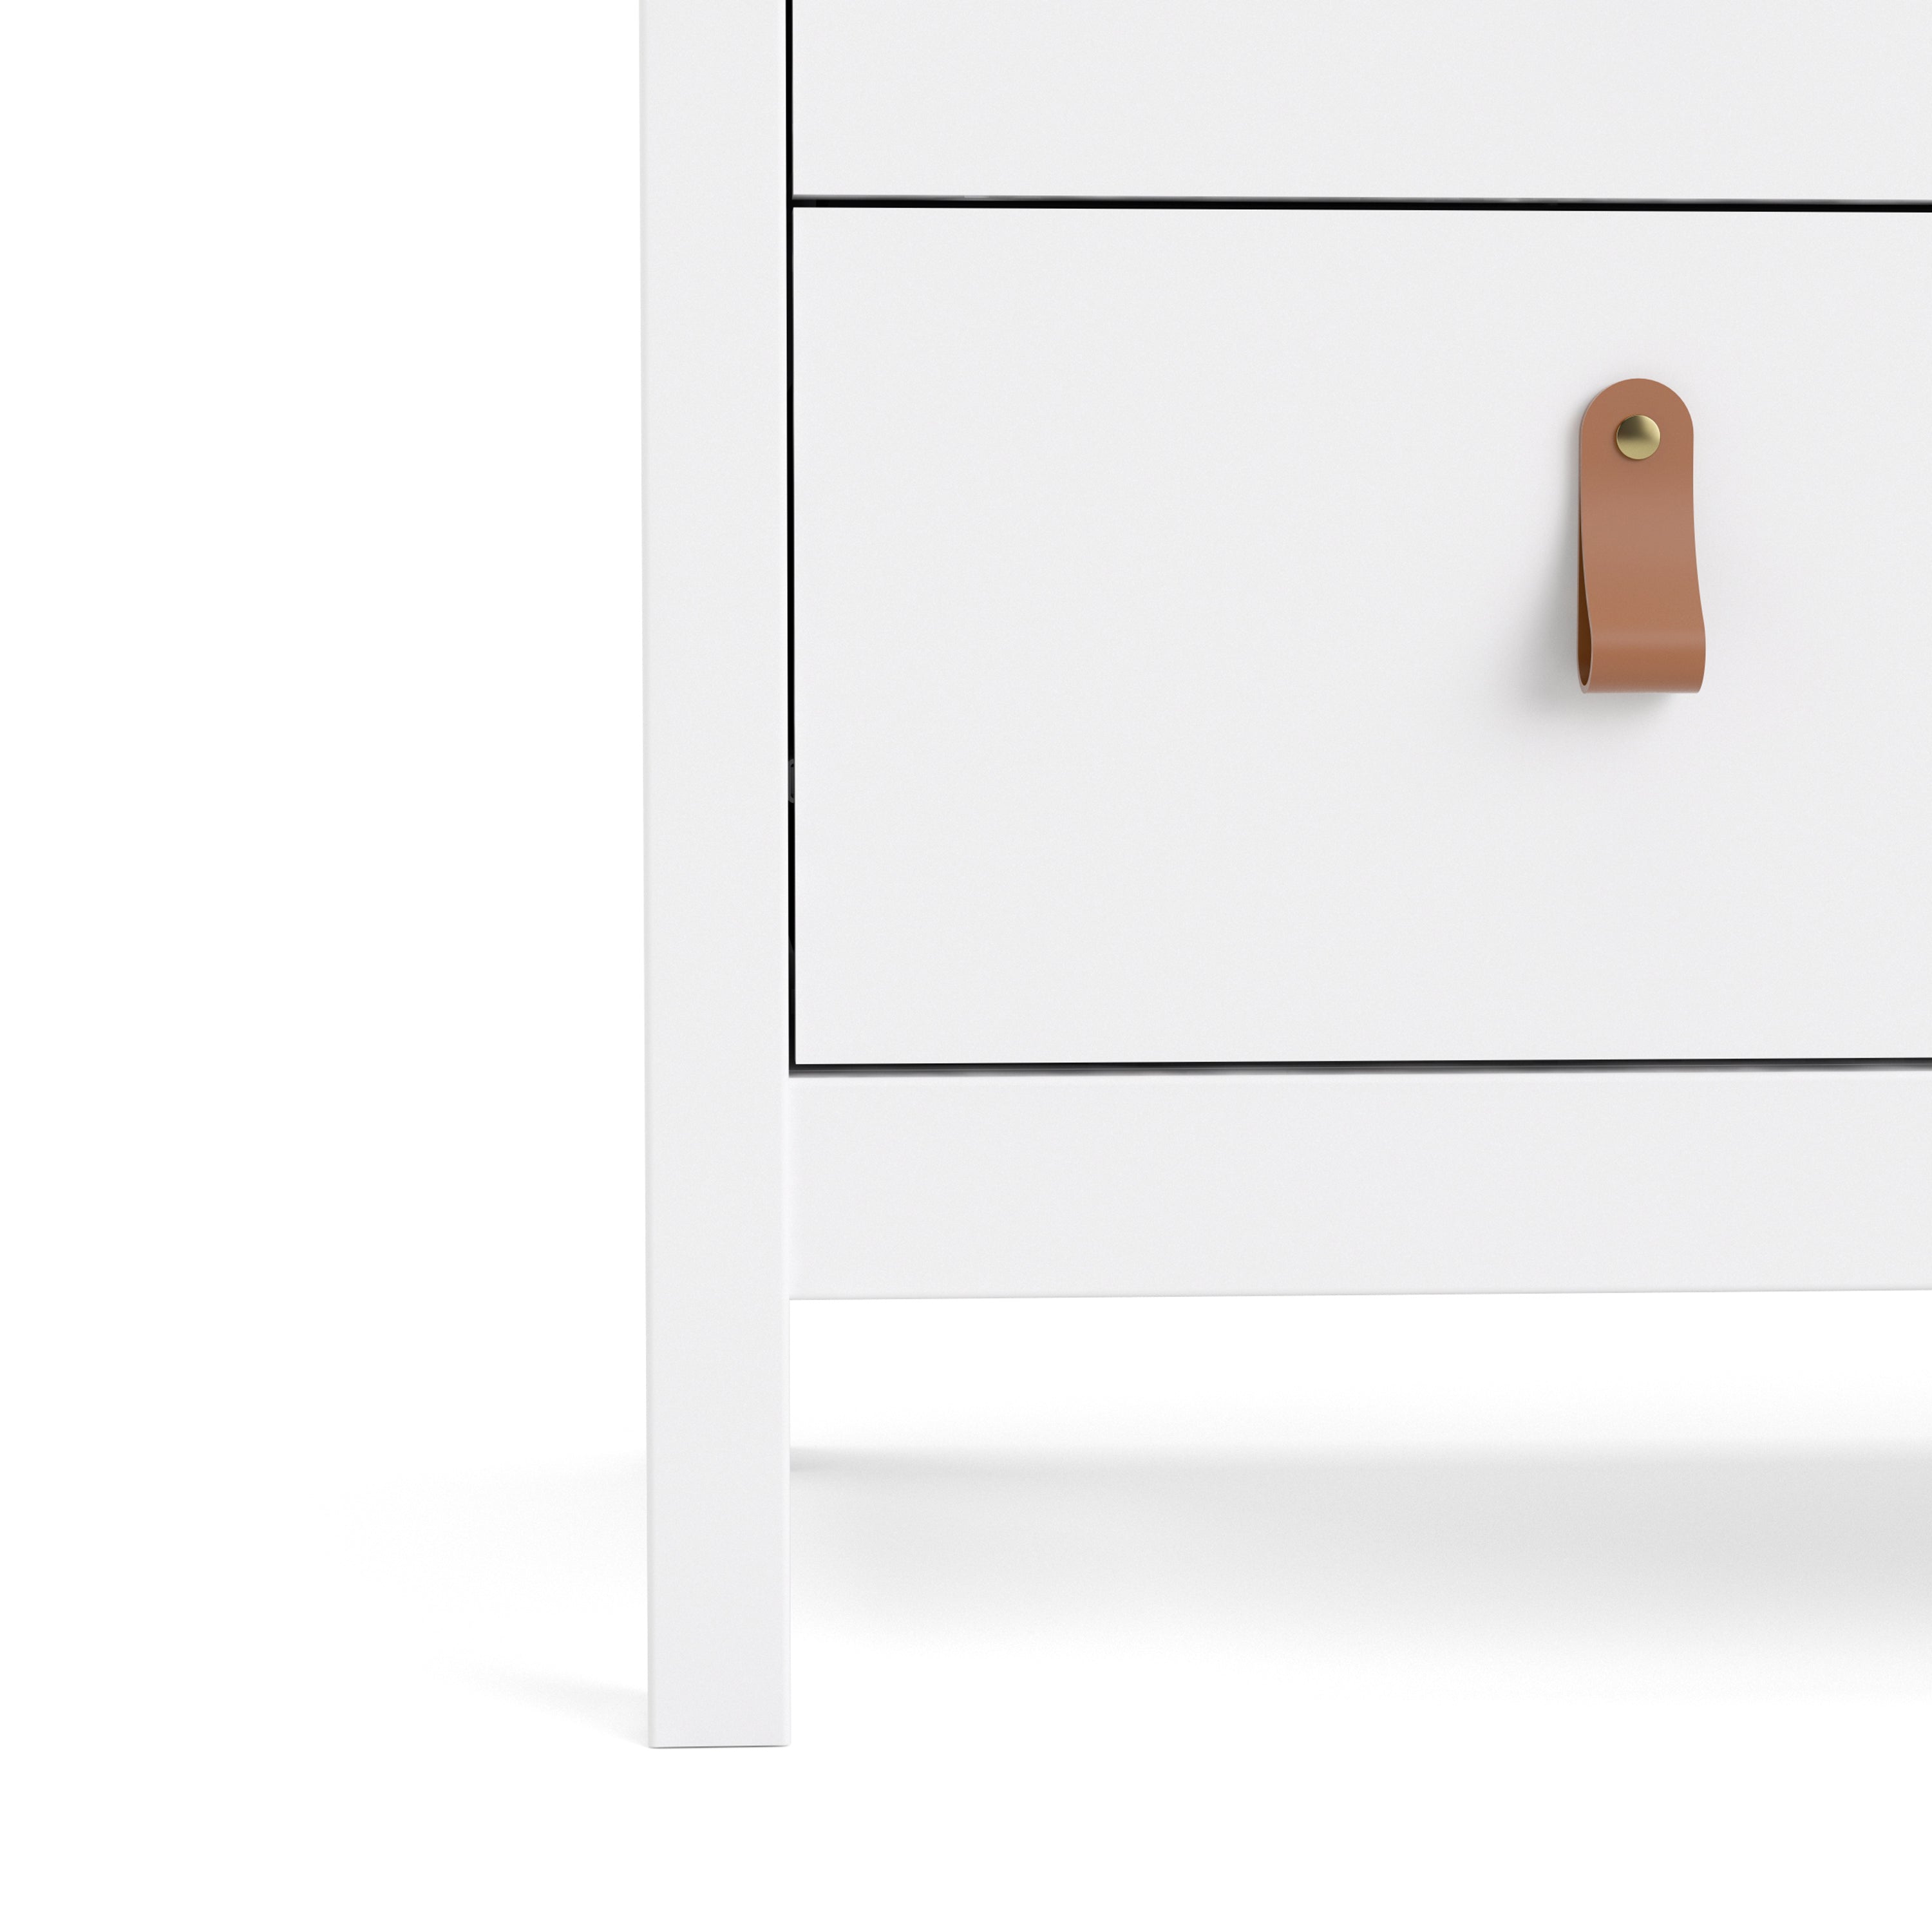 Barcelona Chest 3 Drawers in White Furniture To Go Ltd